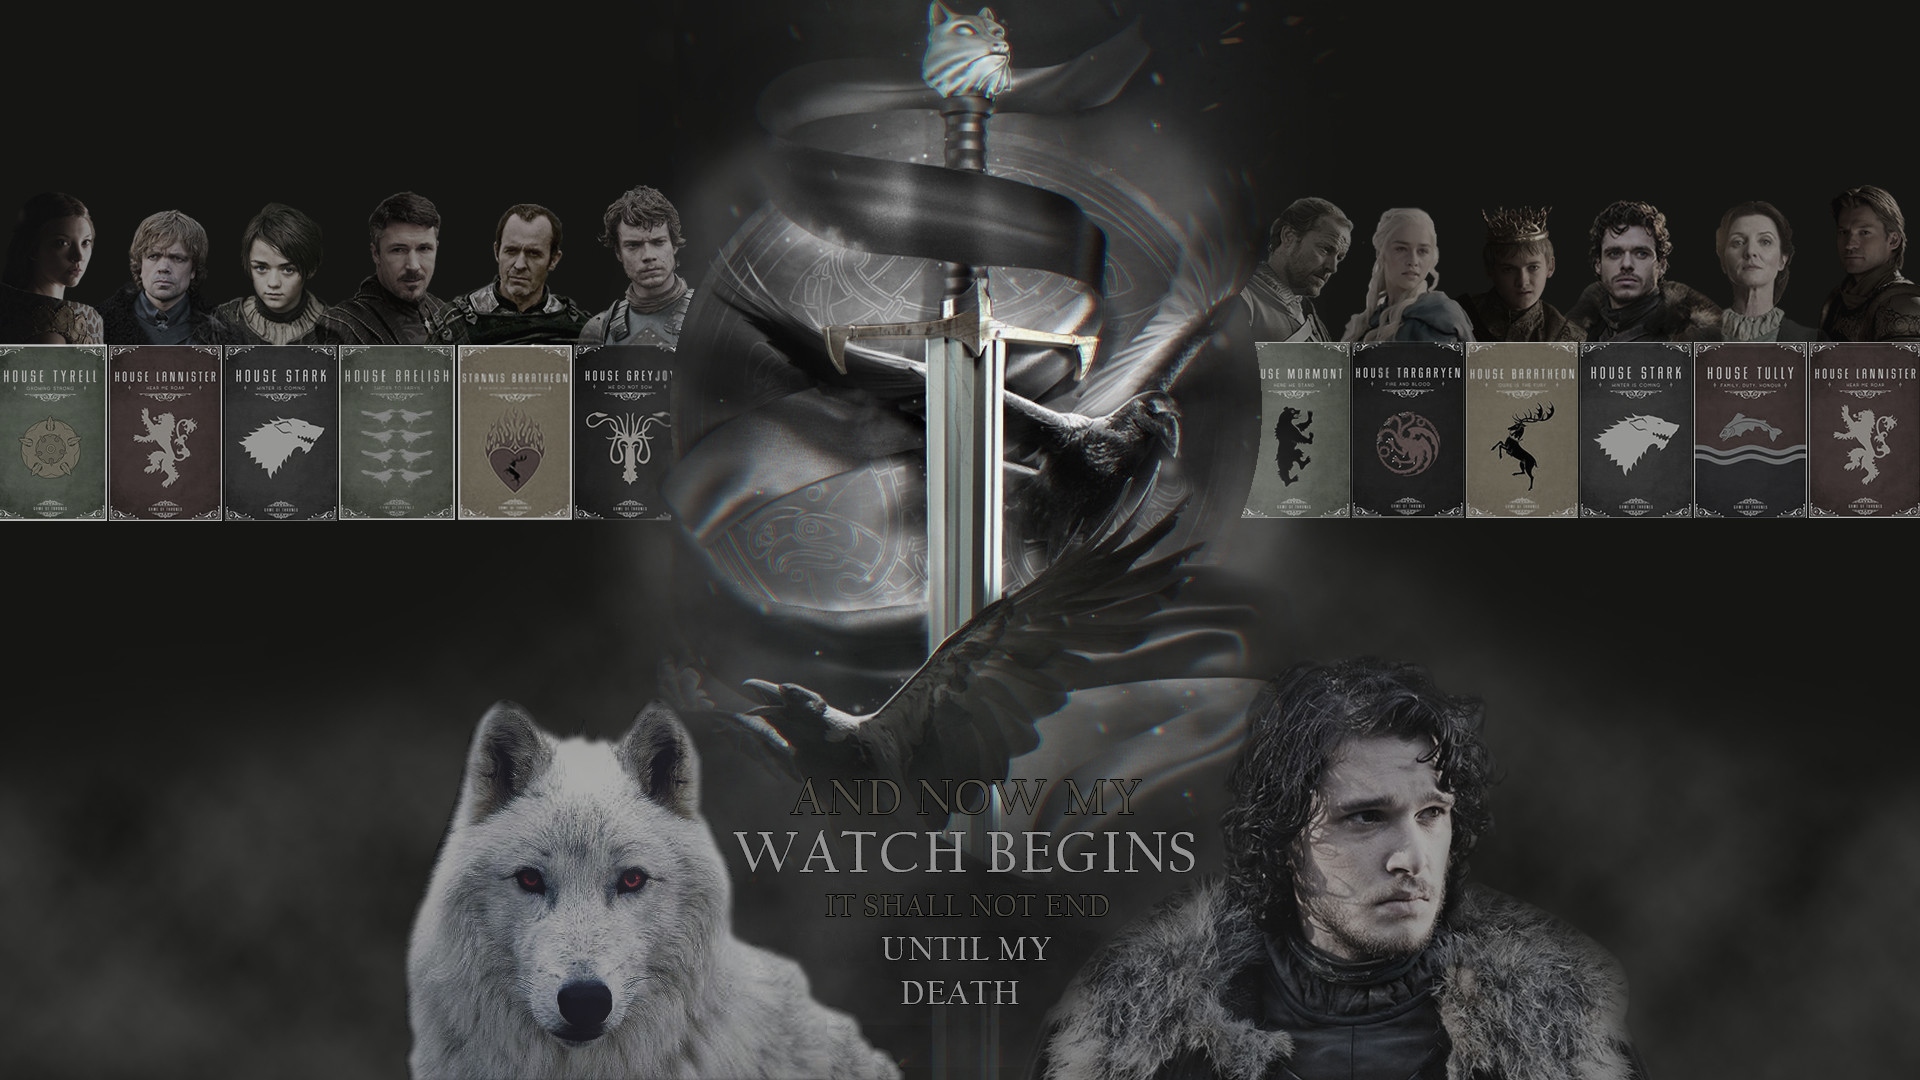 1920x1080 Cool HD Game of Thrones Poster Wallpaper Game Of Thrones Wallpapers  